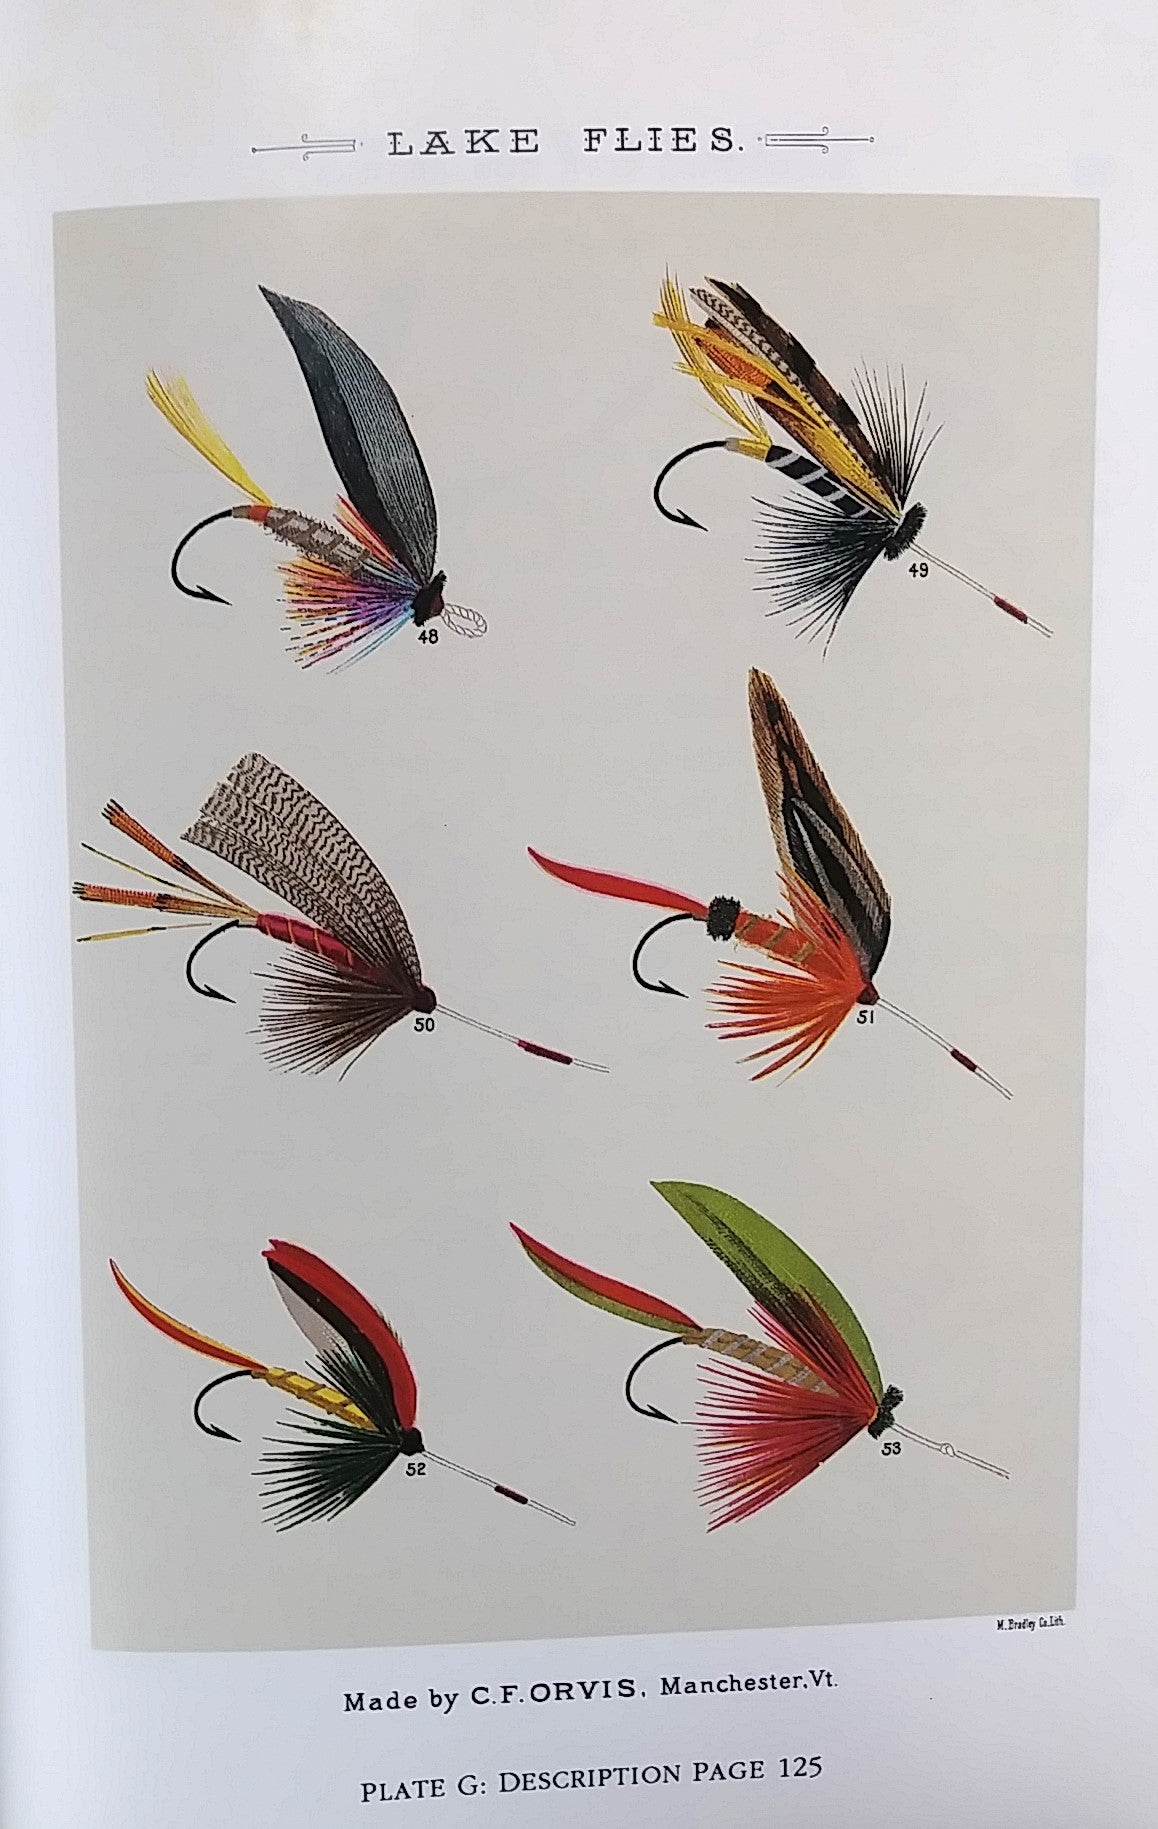 Favorite Flies and their Histories